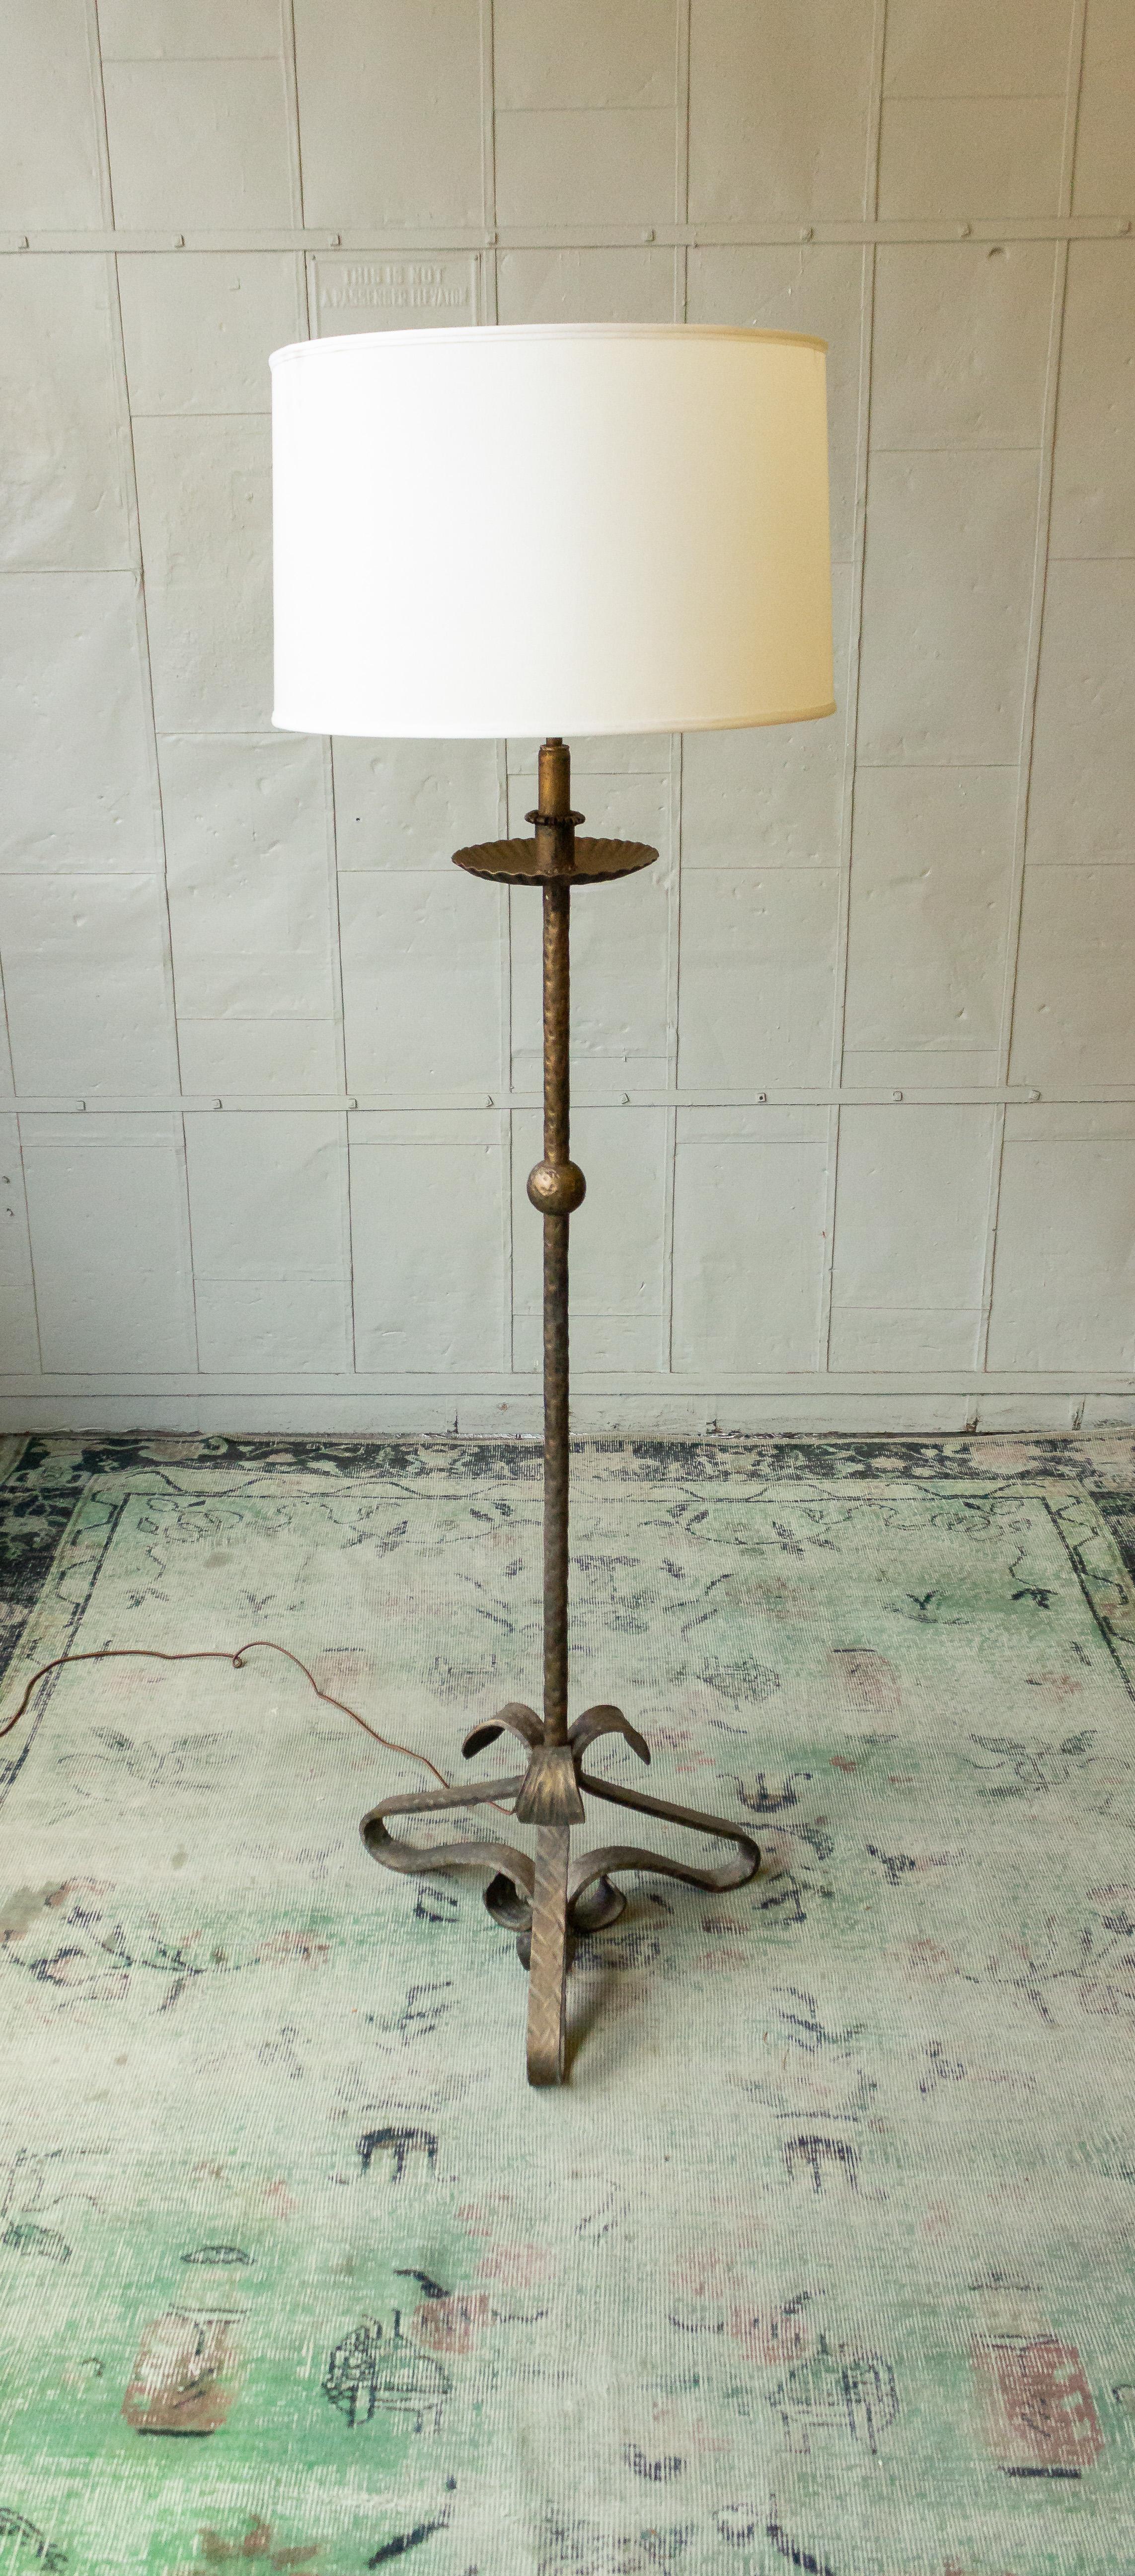 Introducing a captivating 1950s Spanish floor lamp that effortlessly combines the elegance of Art Nouveau with the sleekness of mid-century modern design. This remarkable piece is a true work of art, sure to captivate the hearts of design